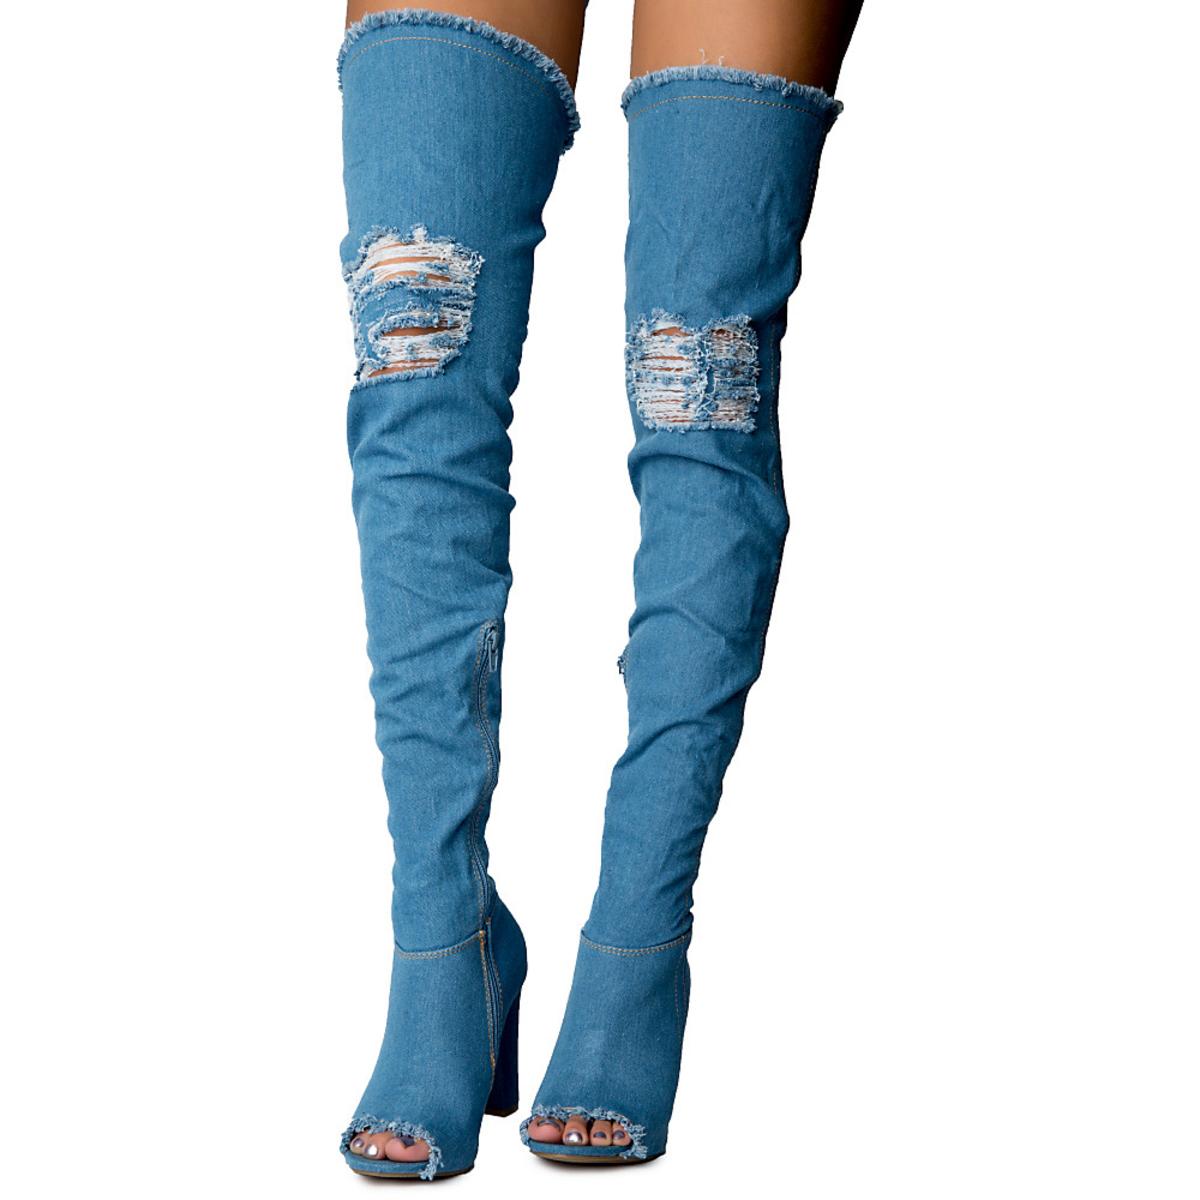 Limelight-60S Over The Knee Boot Blue